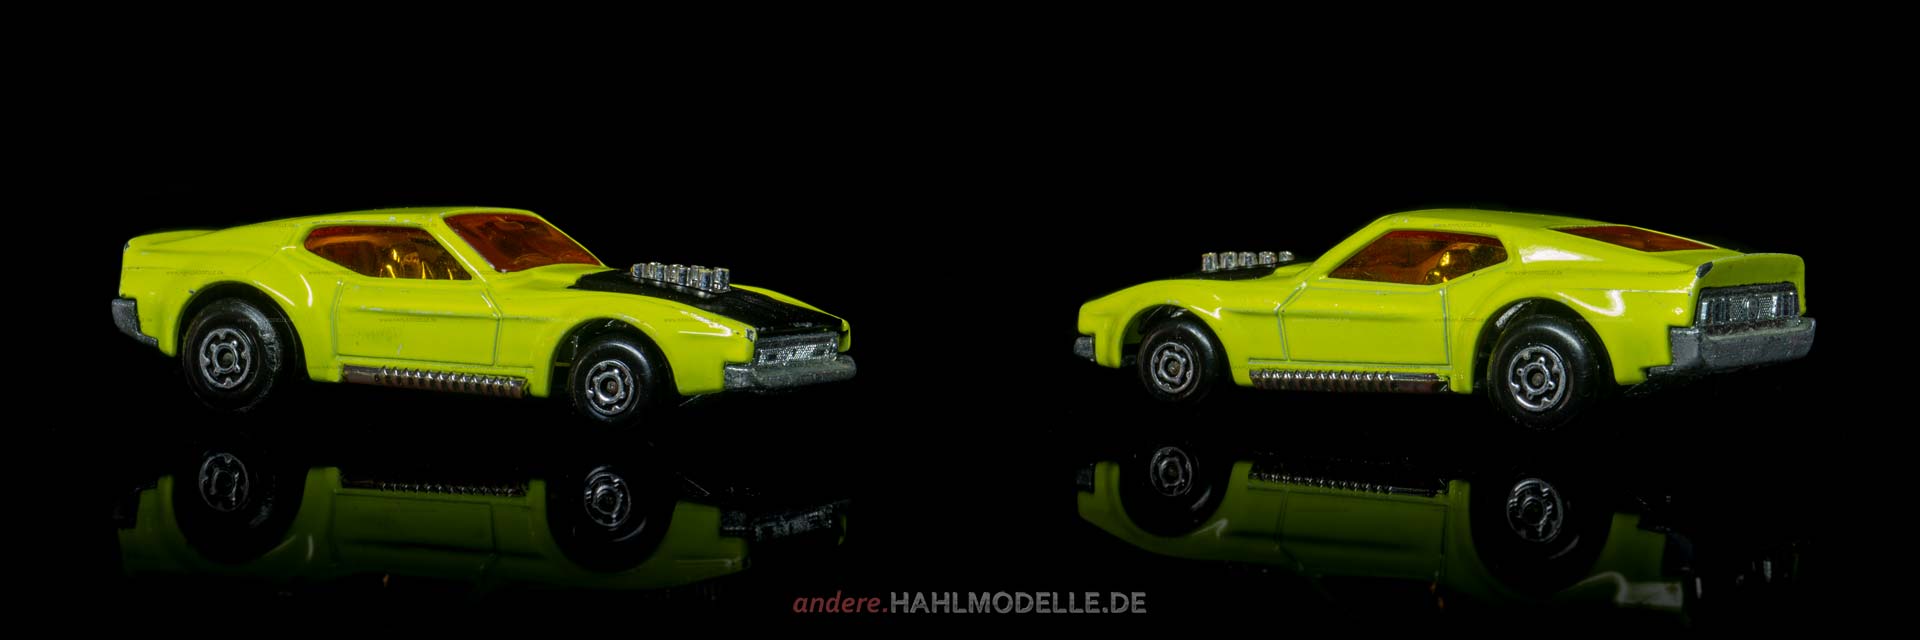 Ford Mustang I (4. Version) | Coupé | Lesney Products & Co. Ltd. | Matchbox Boss Mustang | www.andere.hahlmodelle.de